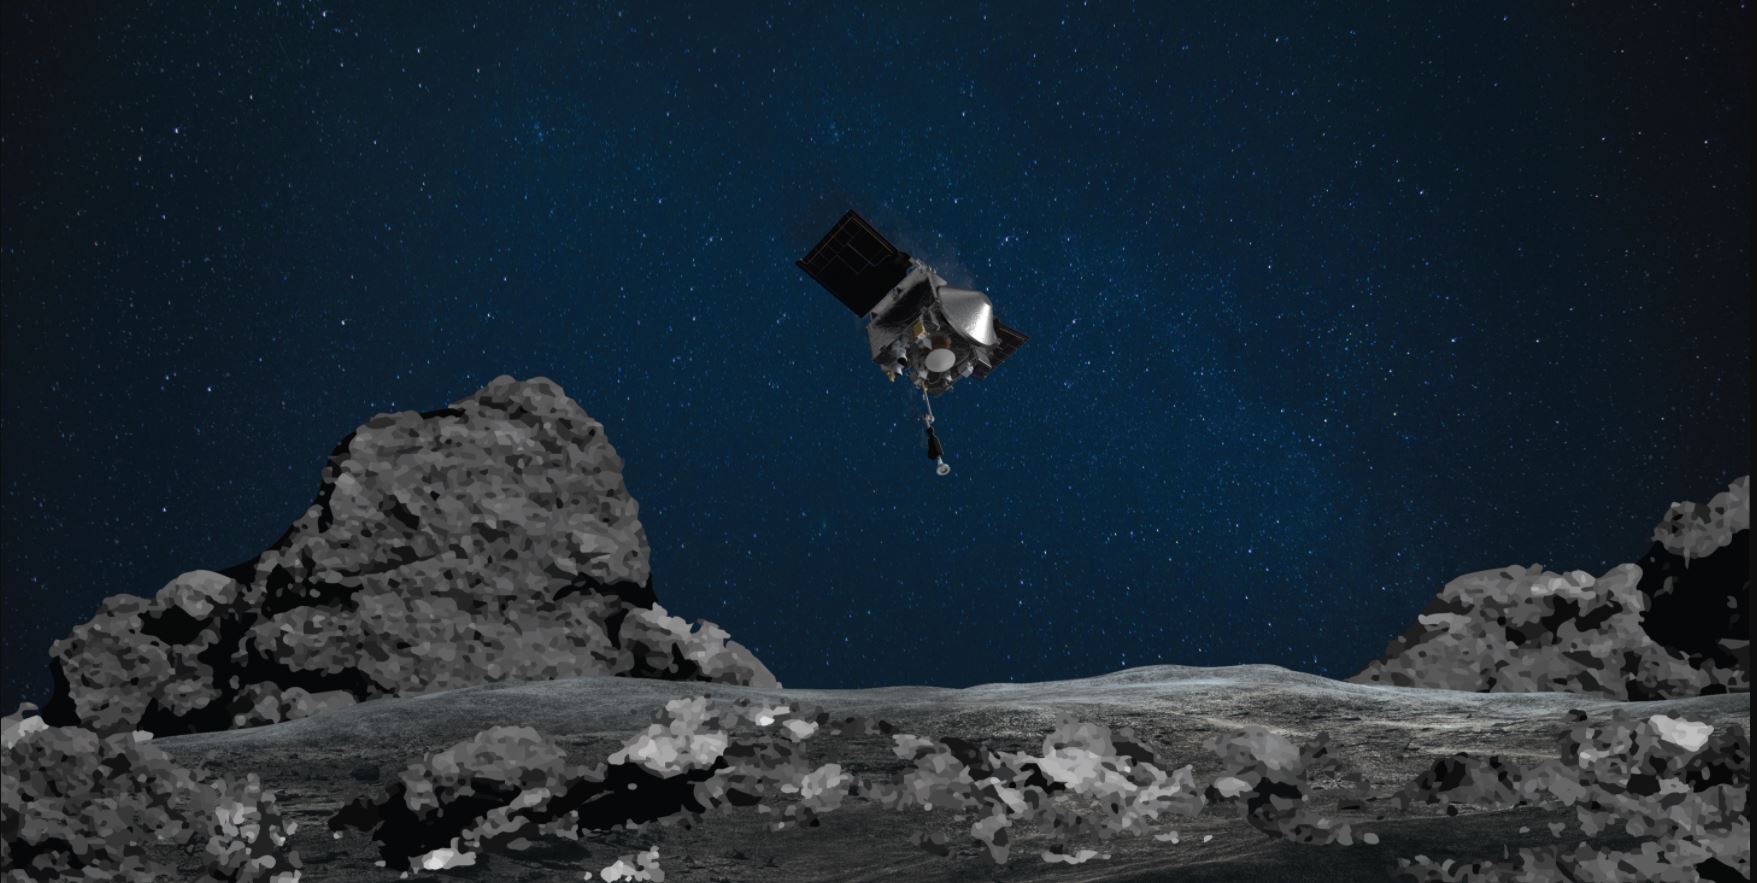 Artist concept of NASA’s OSIRIS-REx spacecraft as it readies itself to touch the surface of asteroid Bennu. This mission is an early precursor to possible asteroid mining. Credits: NASA/Goddard/University of Arizona